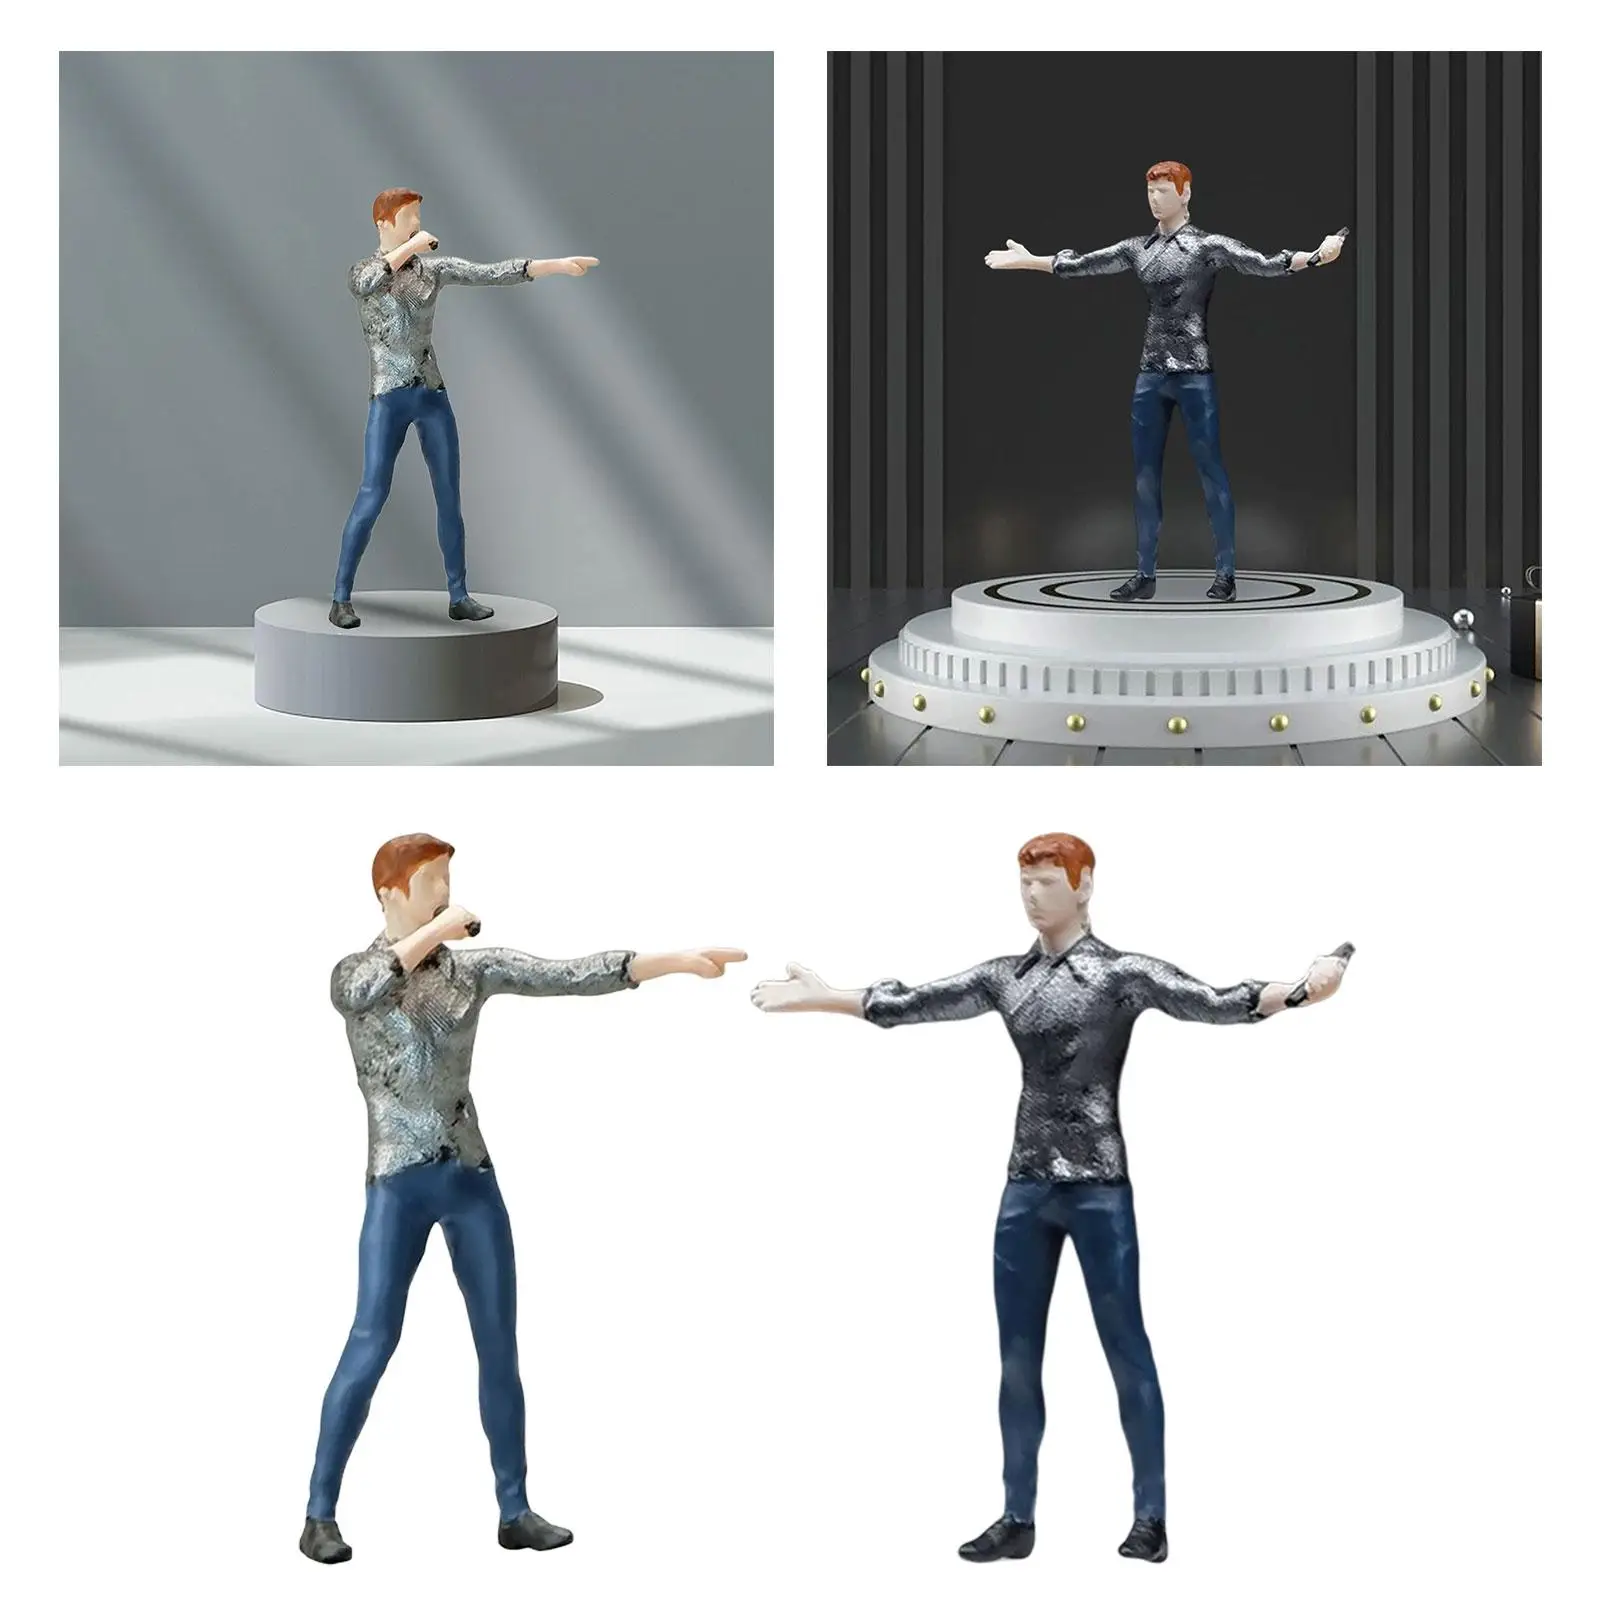 1/64 Male Singer Figures Street Singer Figures People Figurines for Photography Props Micro Landscapes Dollhouse Decoration